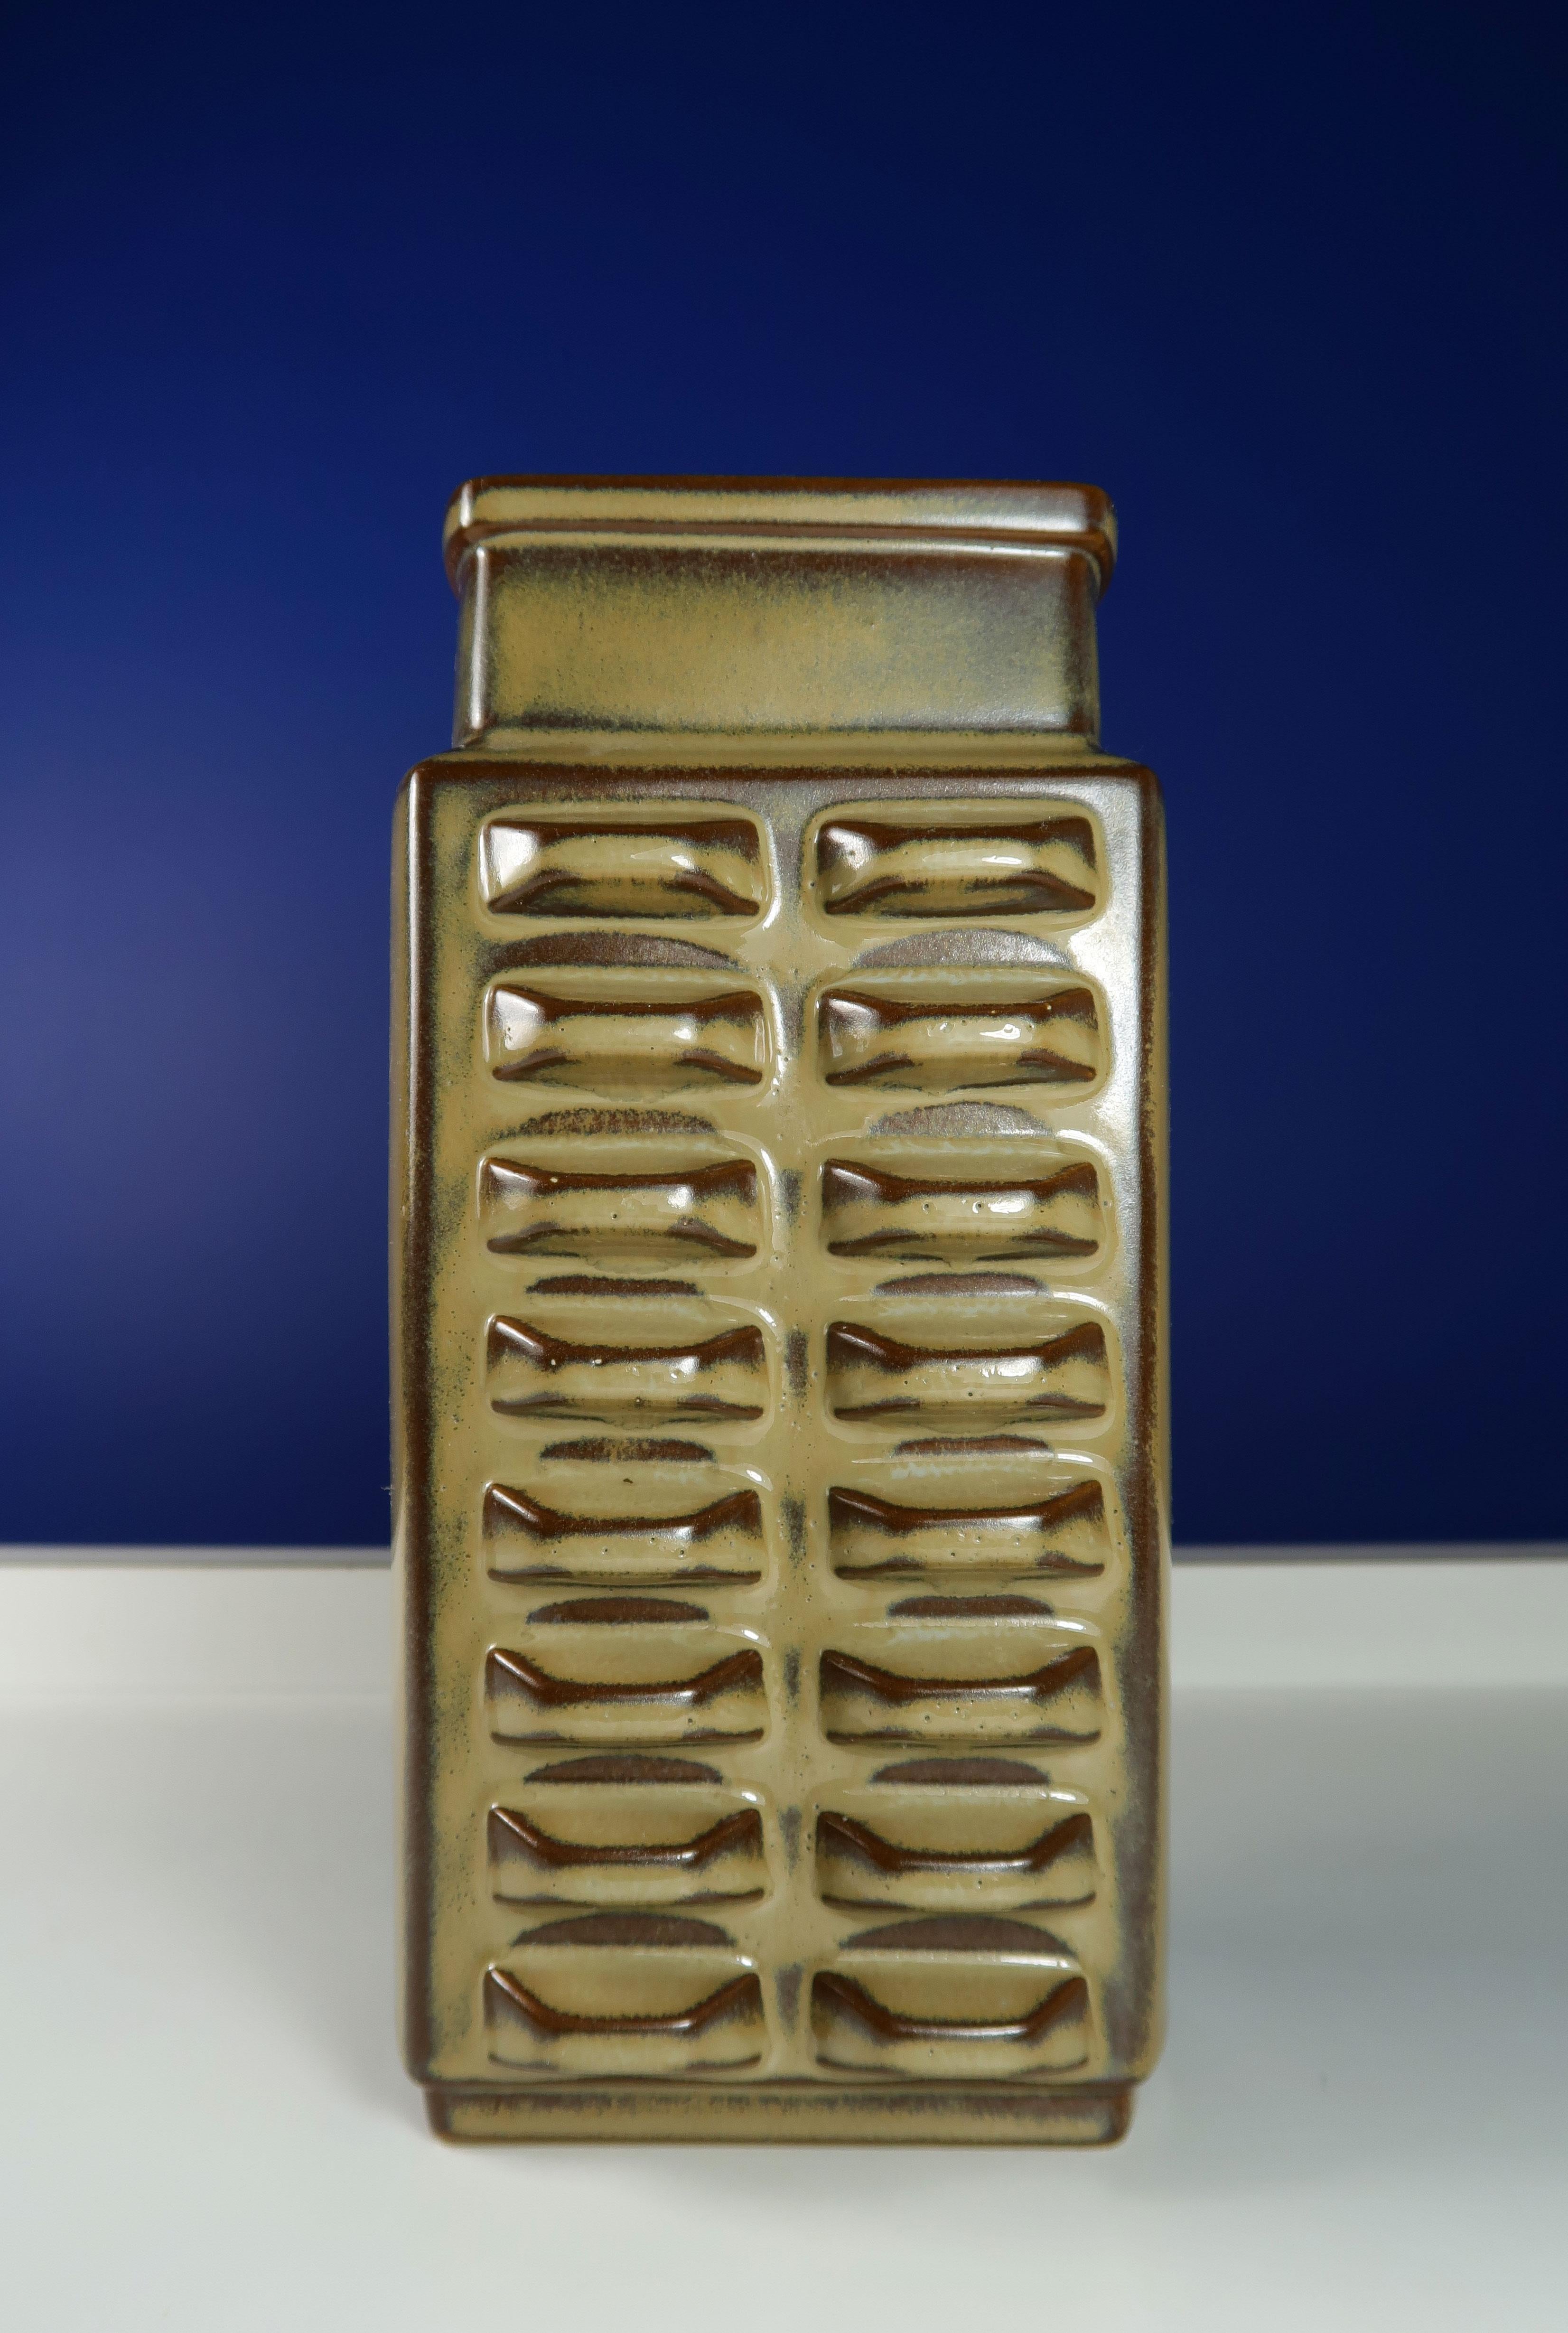 Stunning rectangular Danish Mid-Century Modern vase by Einar Johansen for Søholm Keramik. Italian inspired vase with soft geometric relief pattern manufactured on the Danish island of Bornholm in the mid-1960s. Model 3405 in a rare version with warm